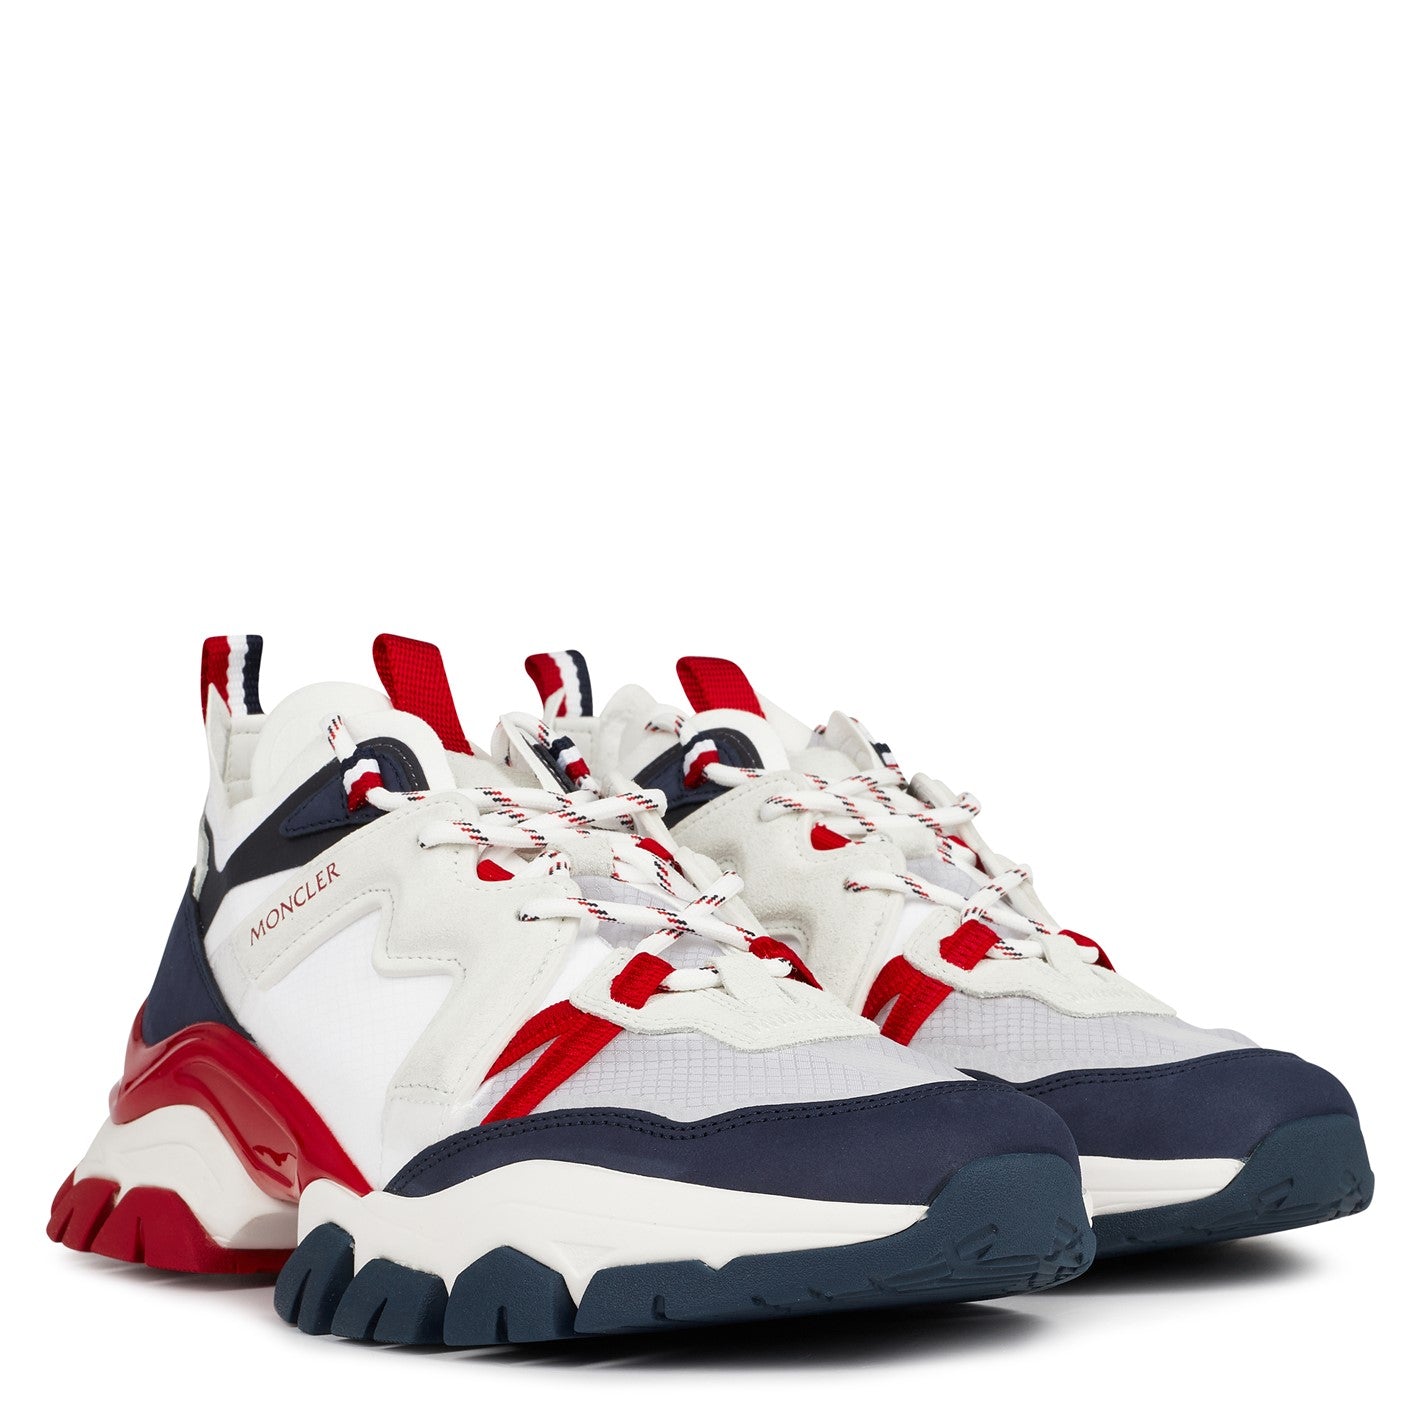 Moncler Leave No Trace Sneakers - DANYOUNGUK